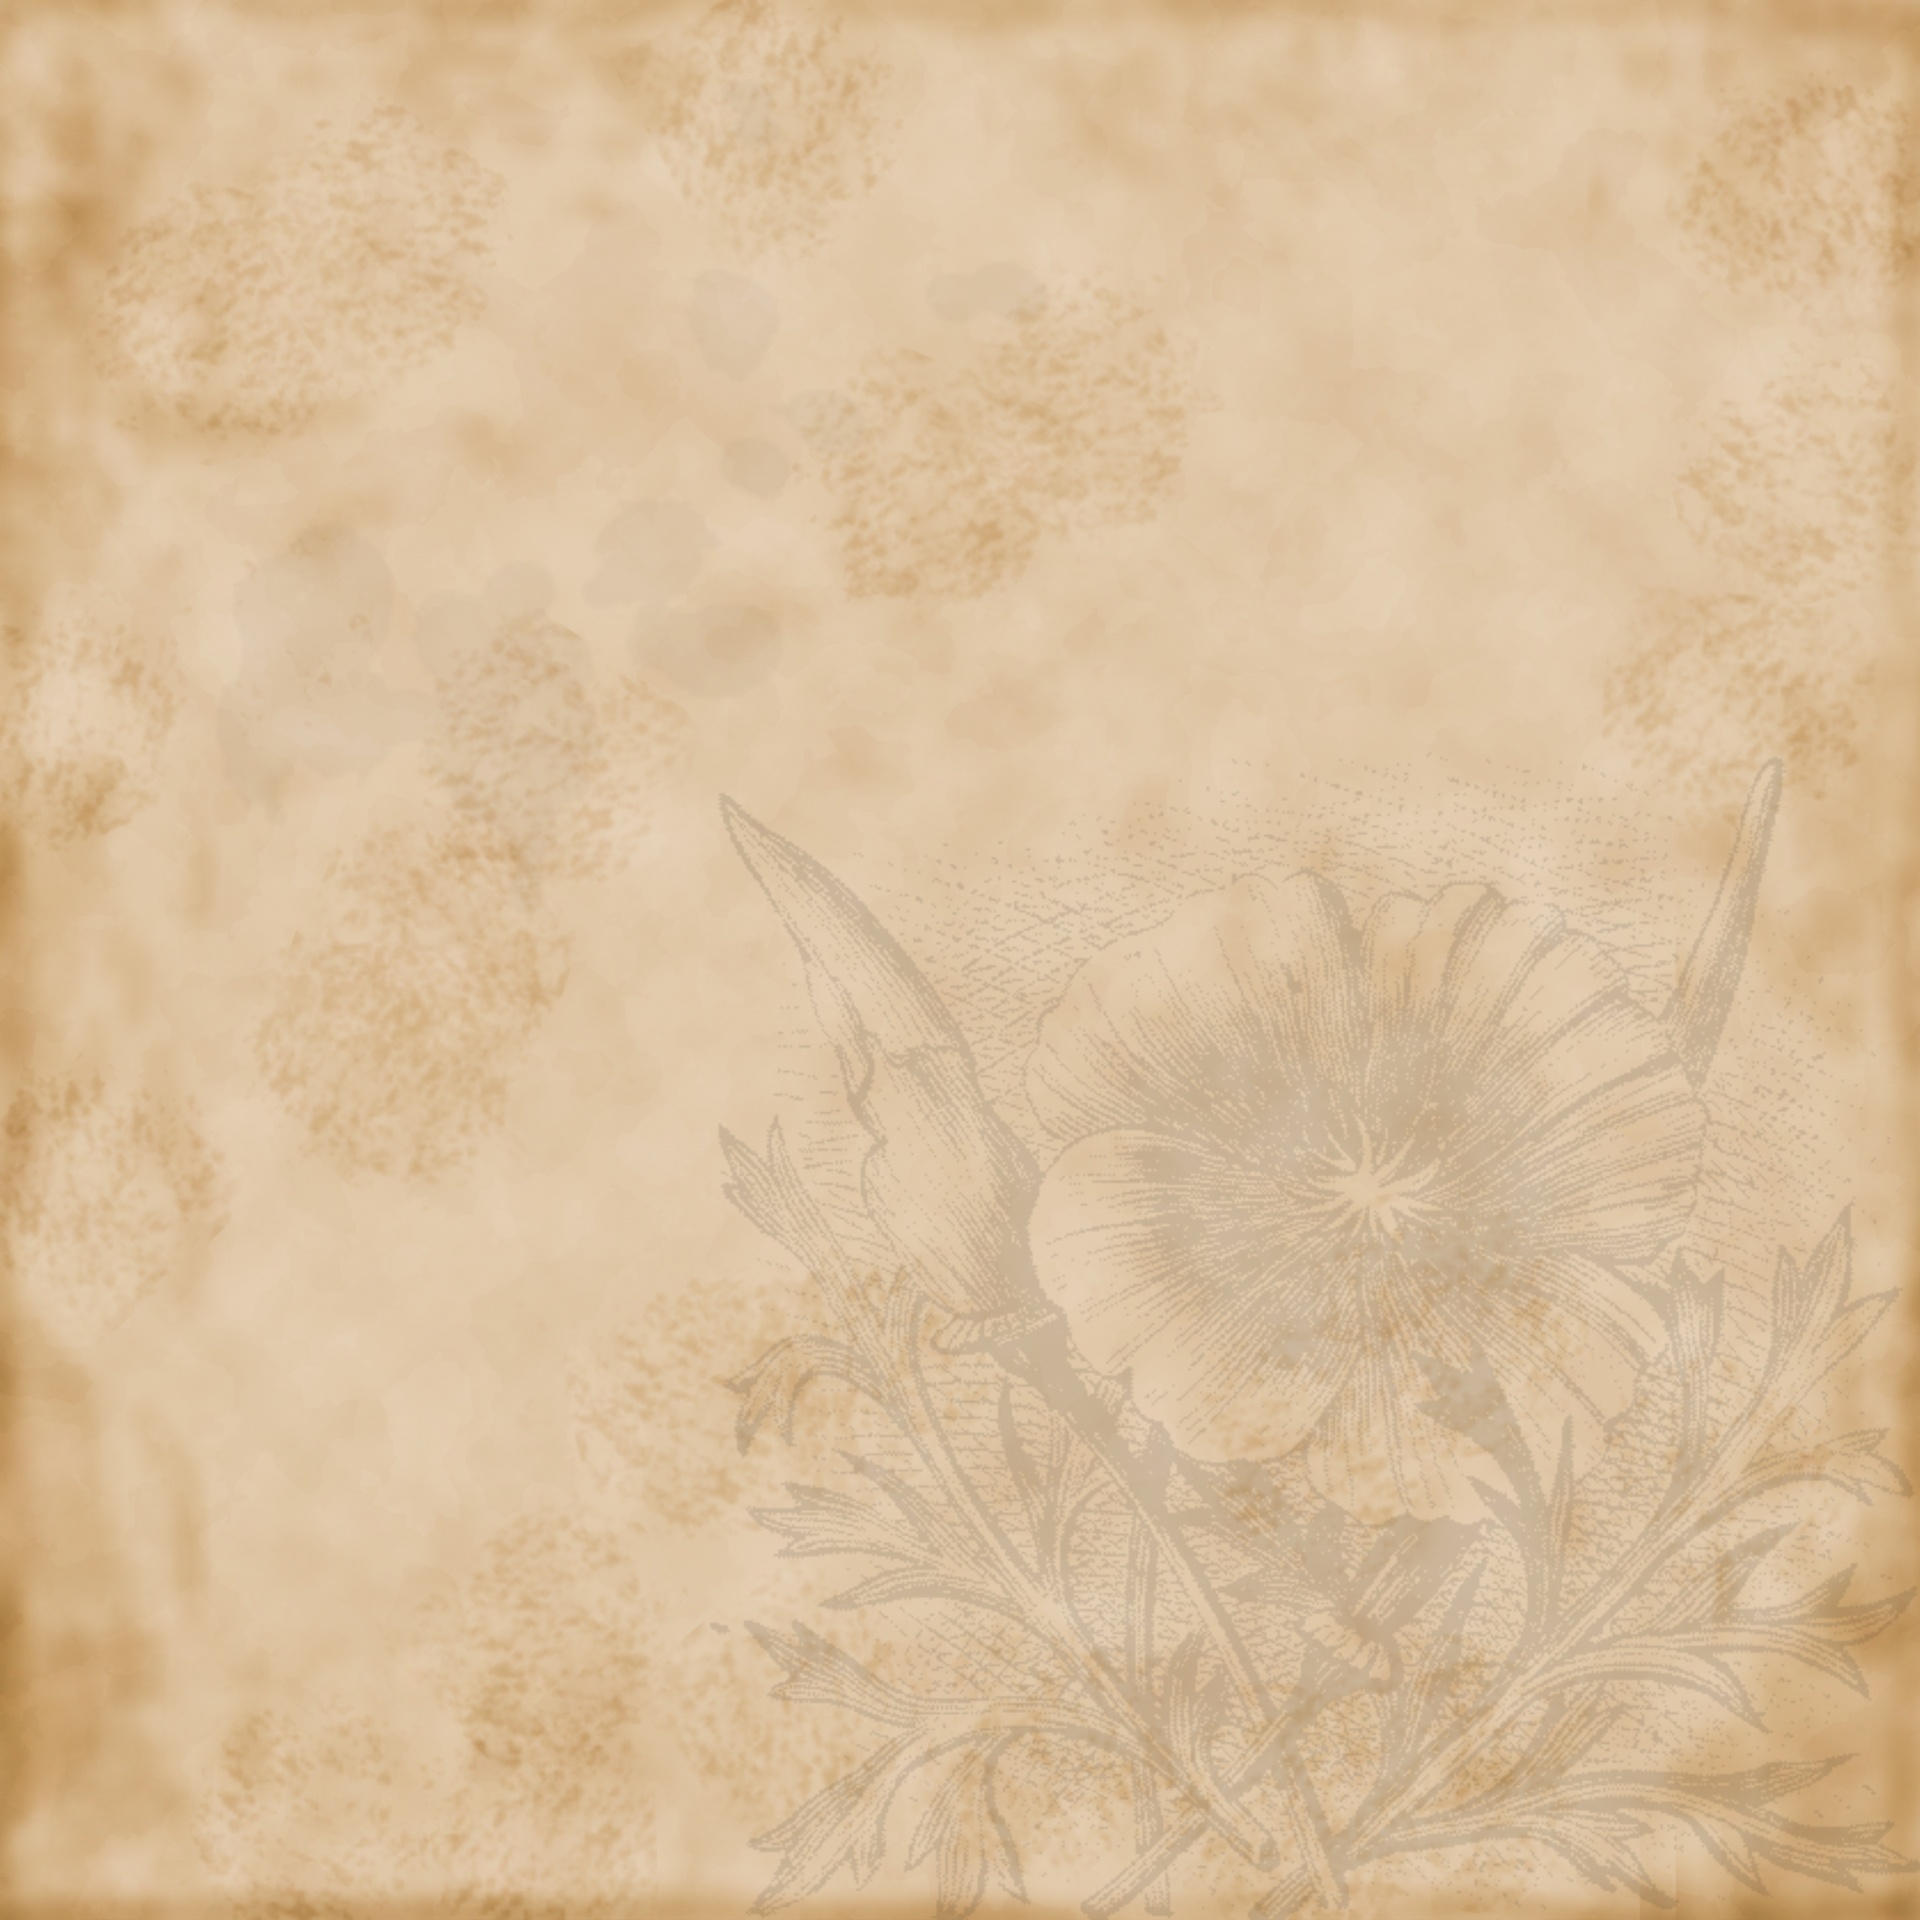 Vintage paper,note,background,layer element,old - free image from  